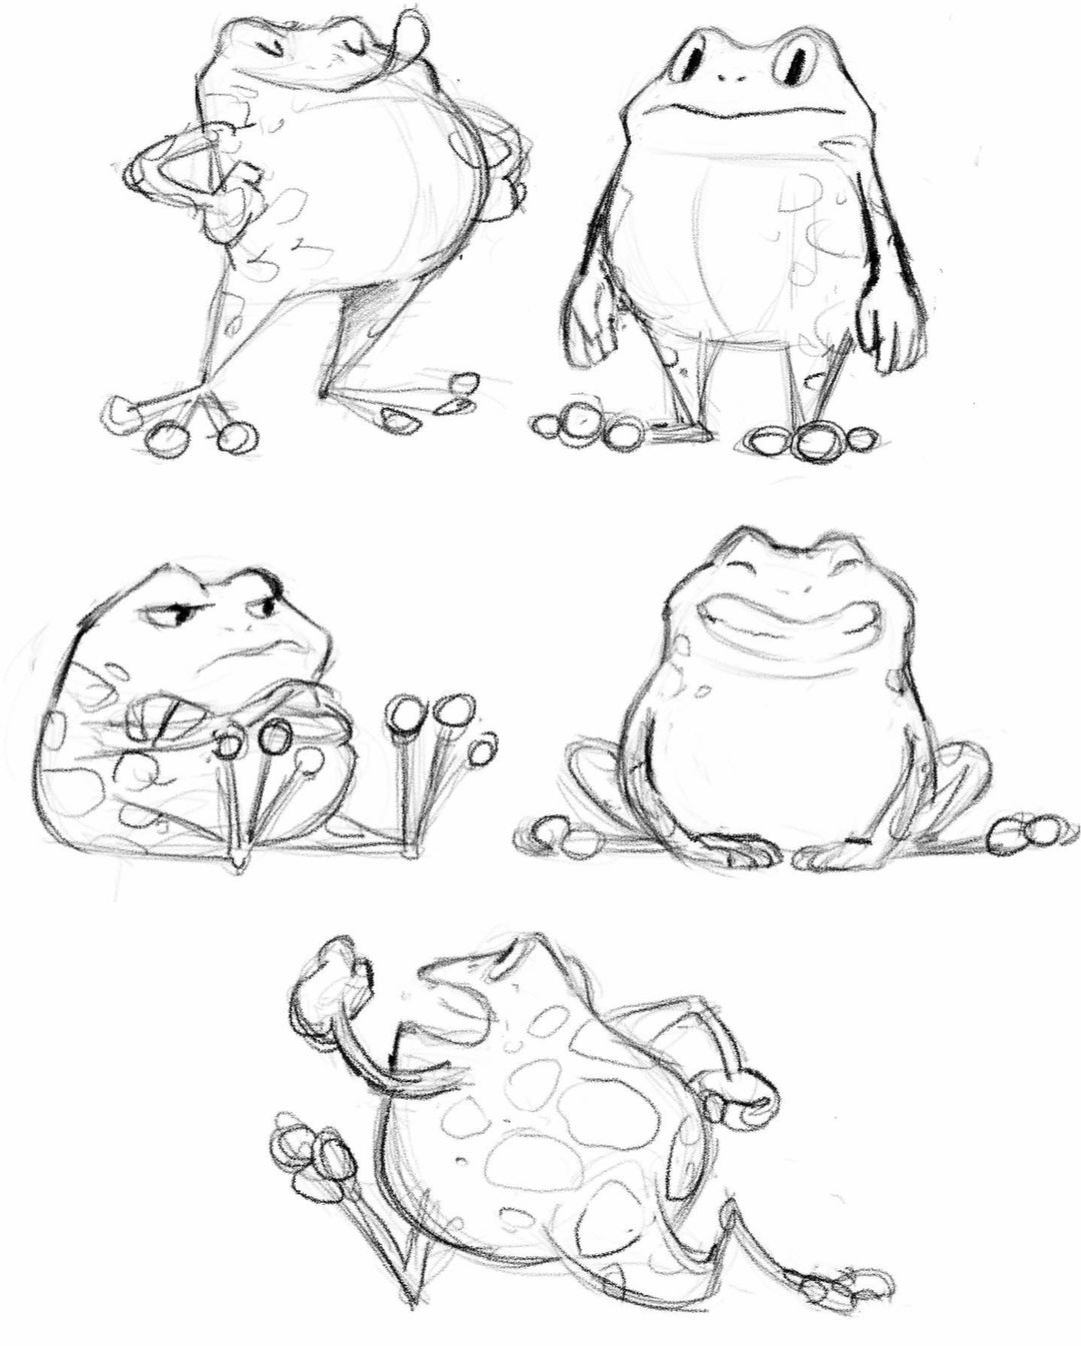 Skecthes of the frog in varied poses